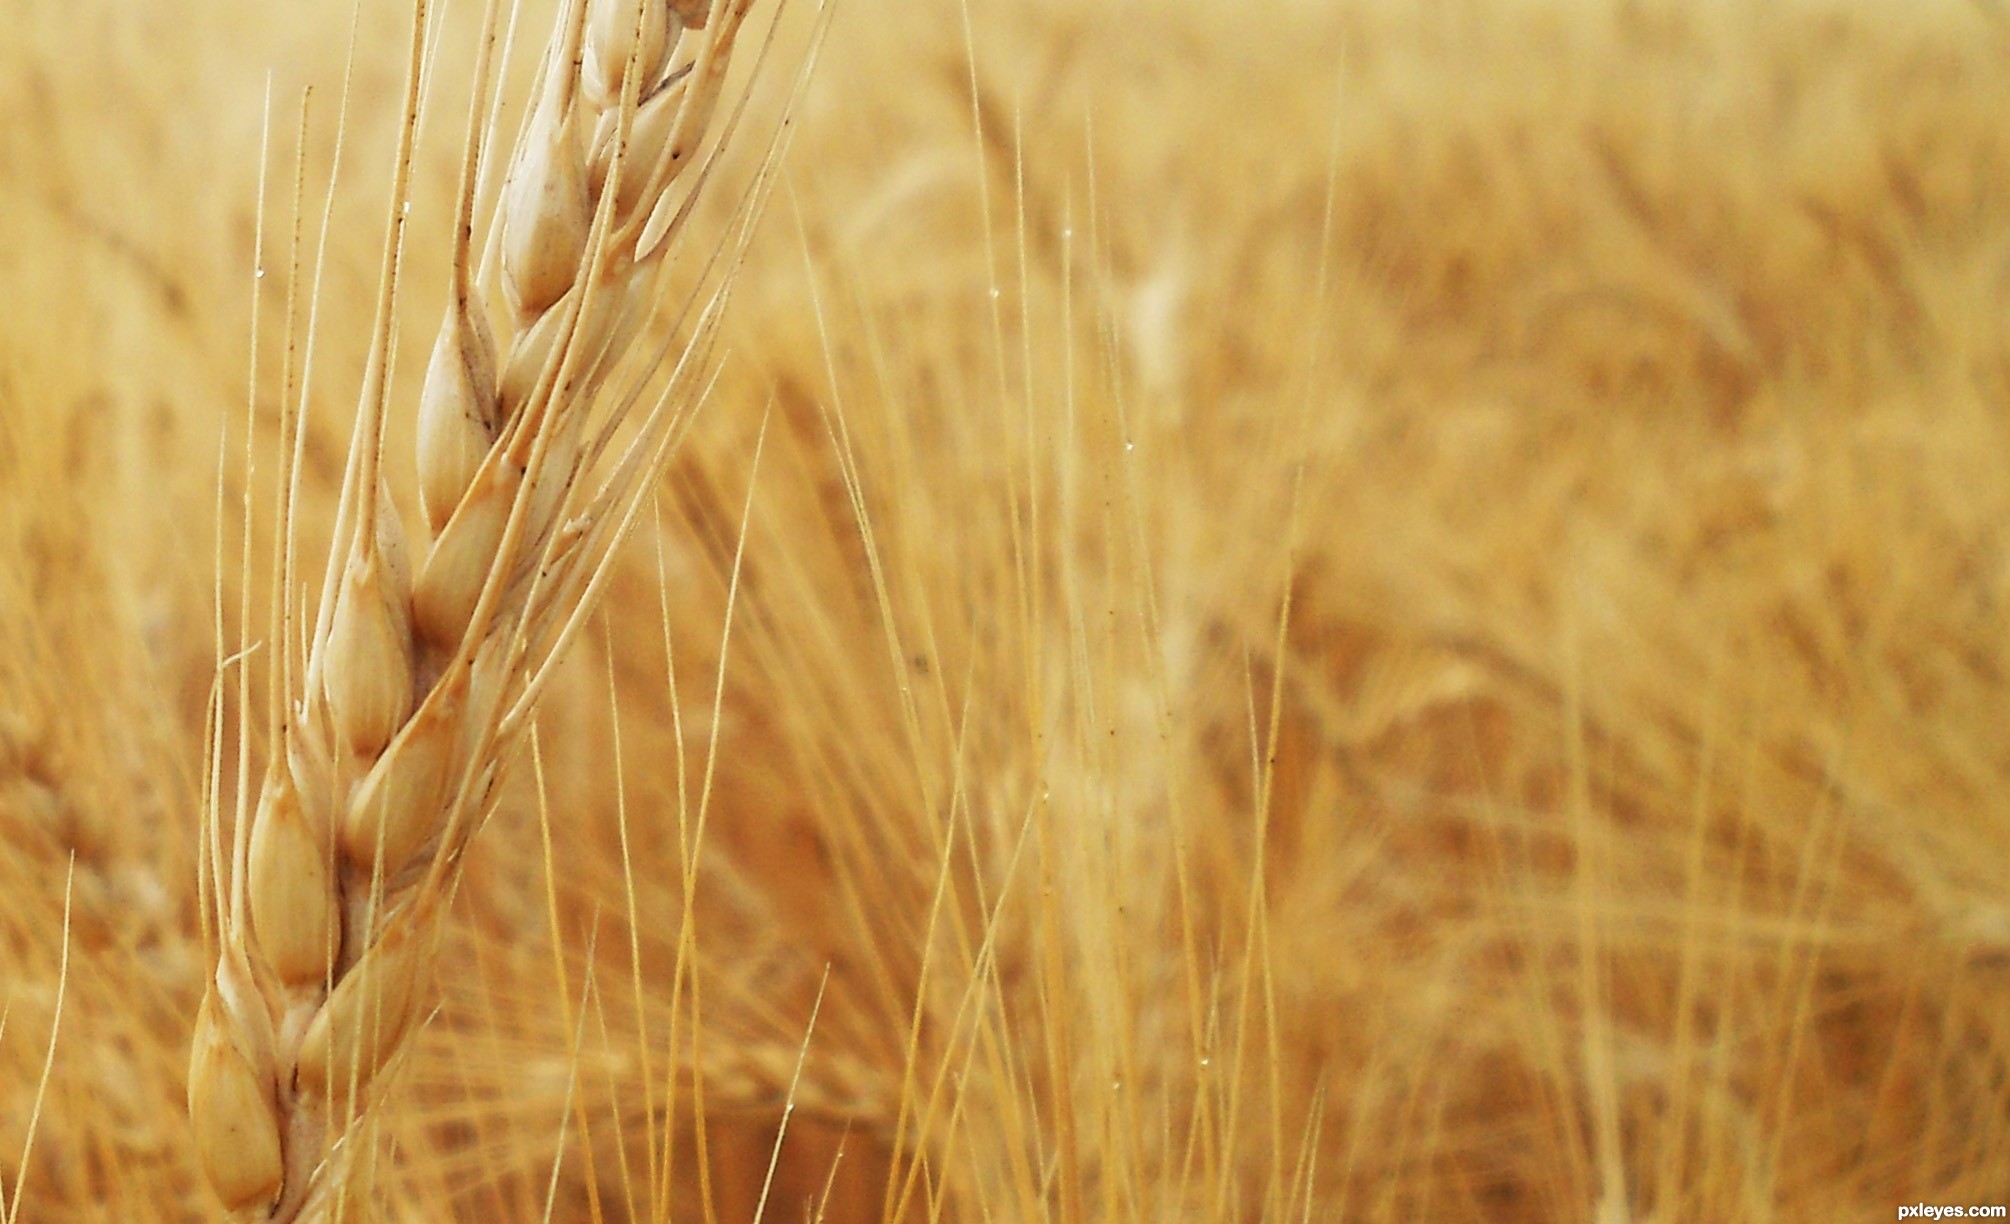 Wheat Photography Contest Pictures - Image Page 1 - Pxleyes.com